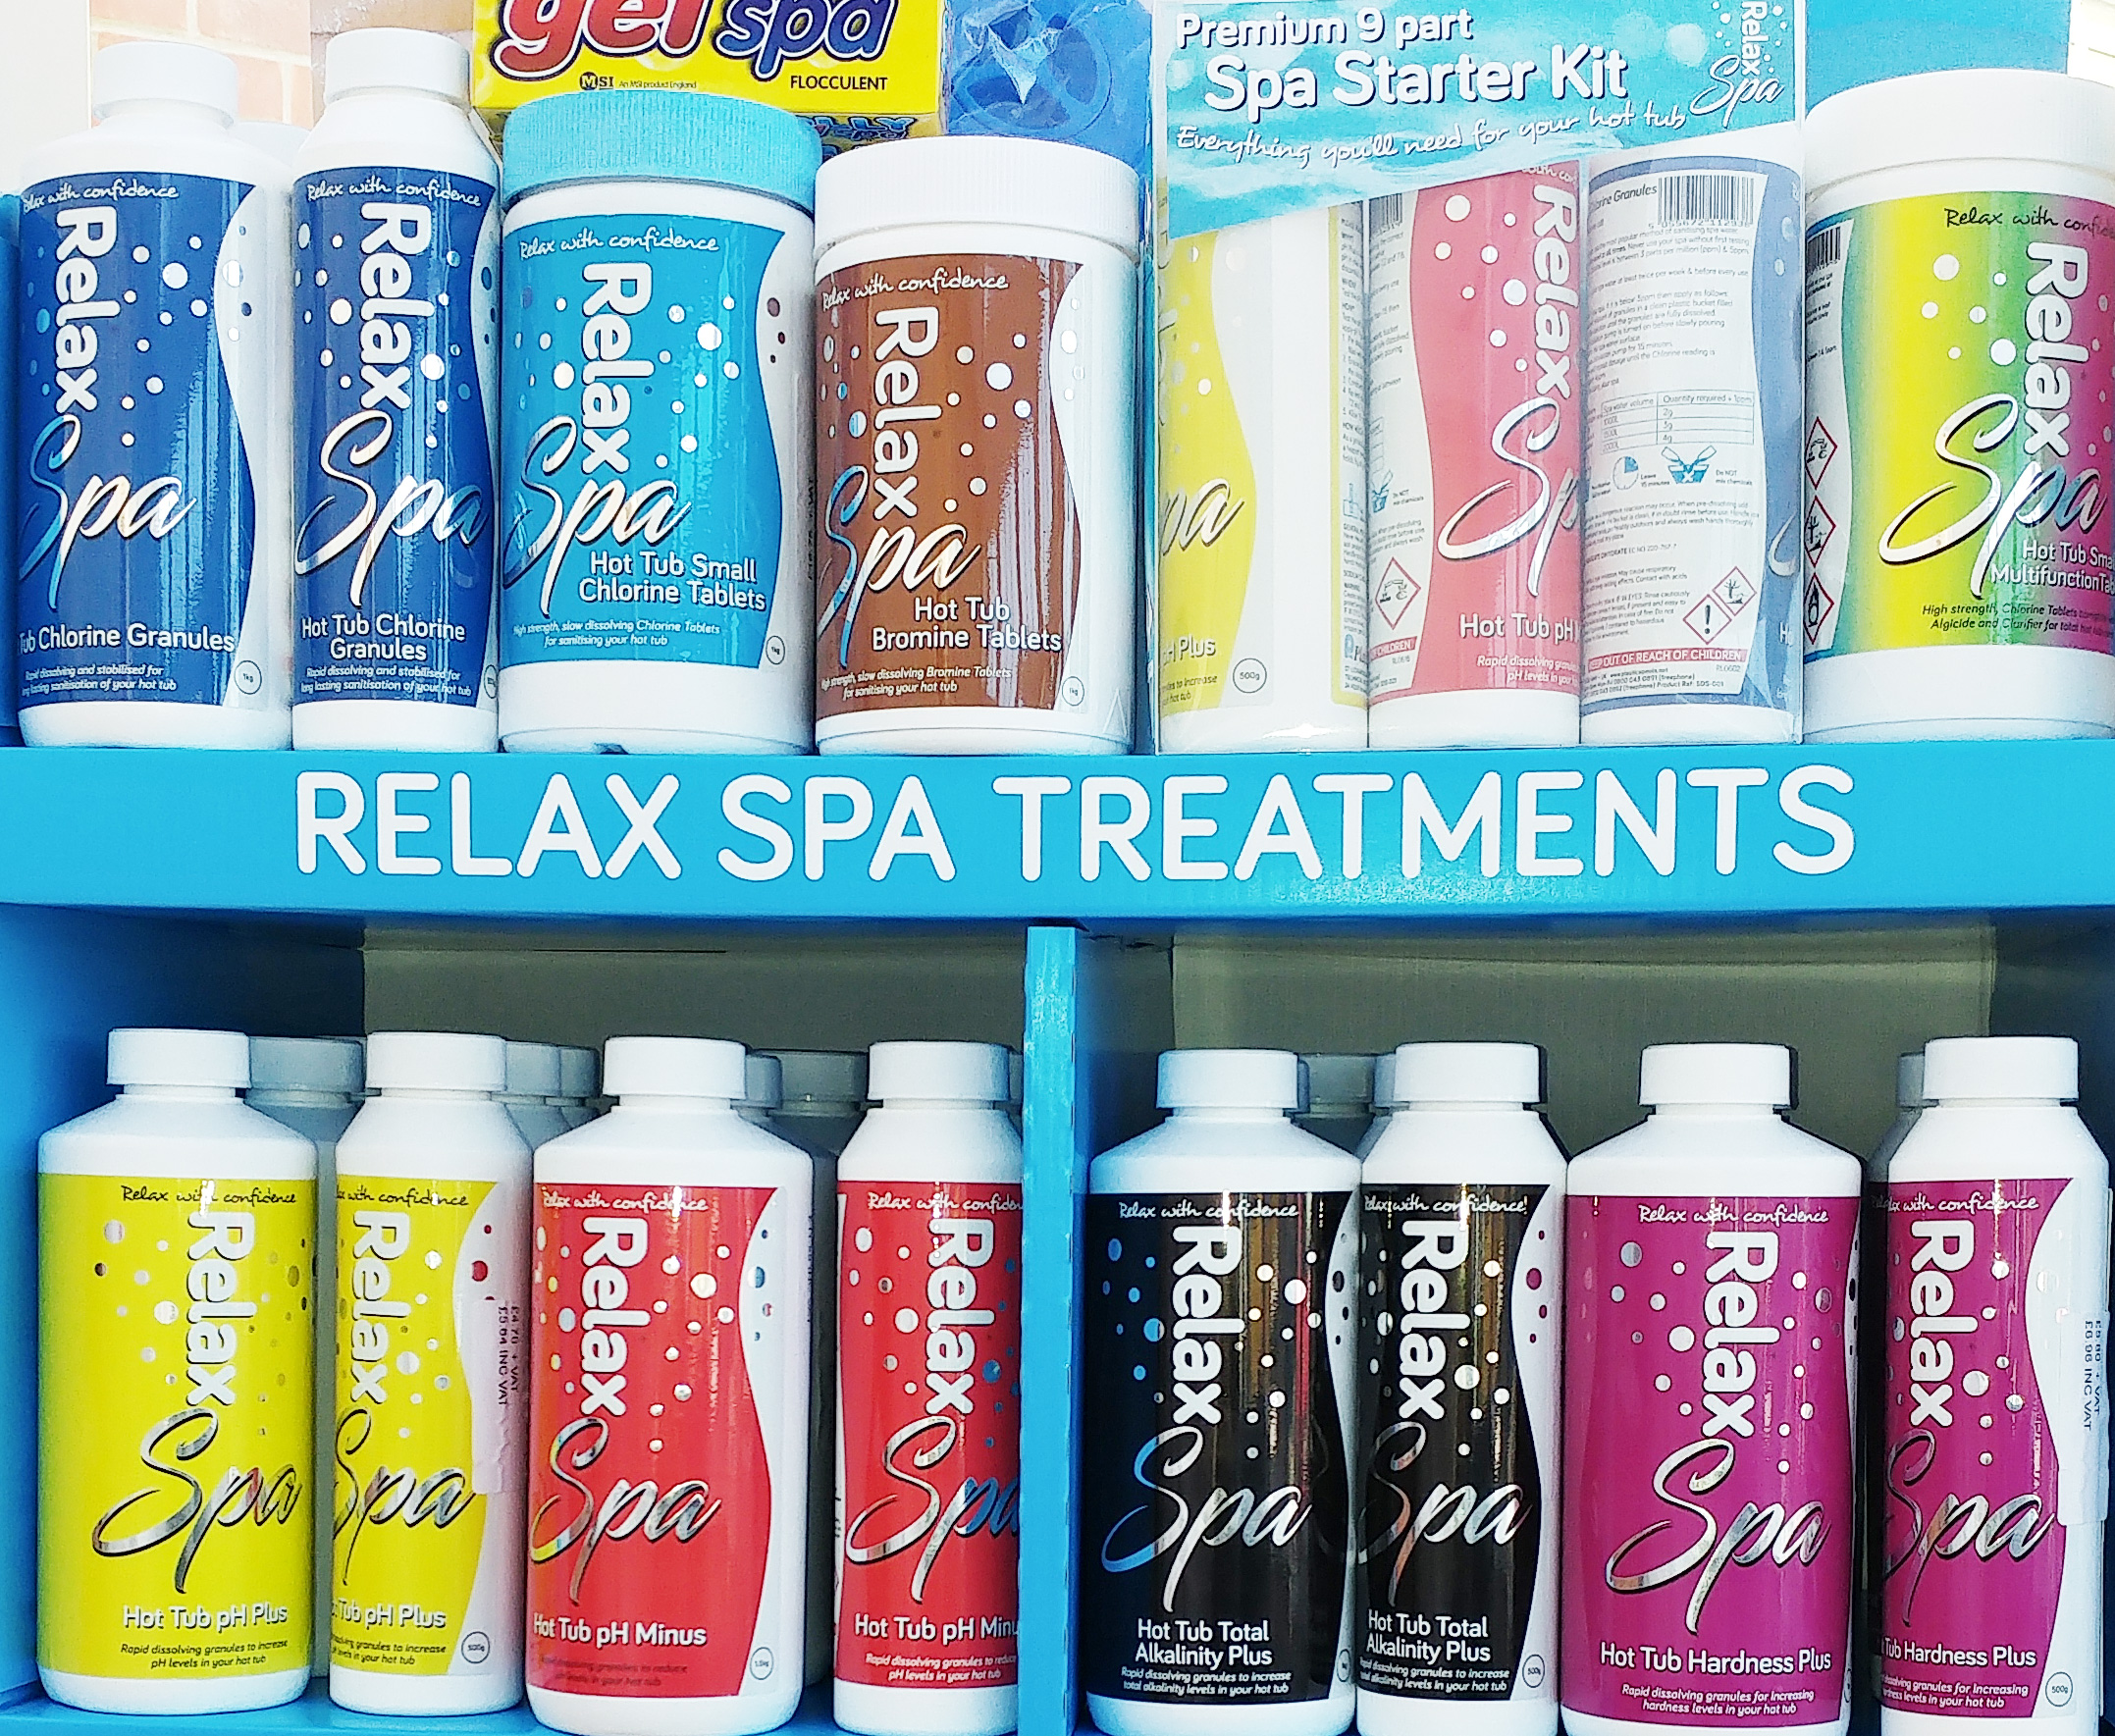 Relax Spa Treatments